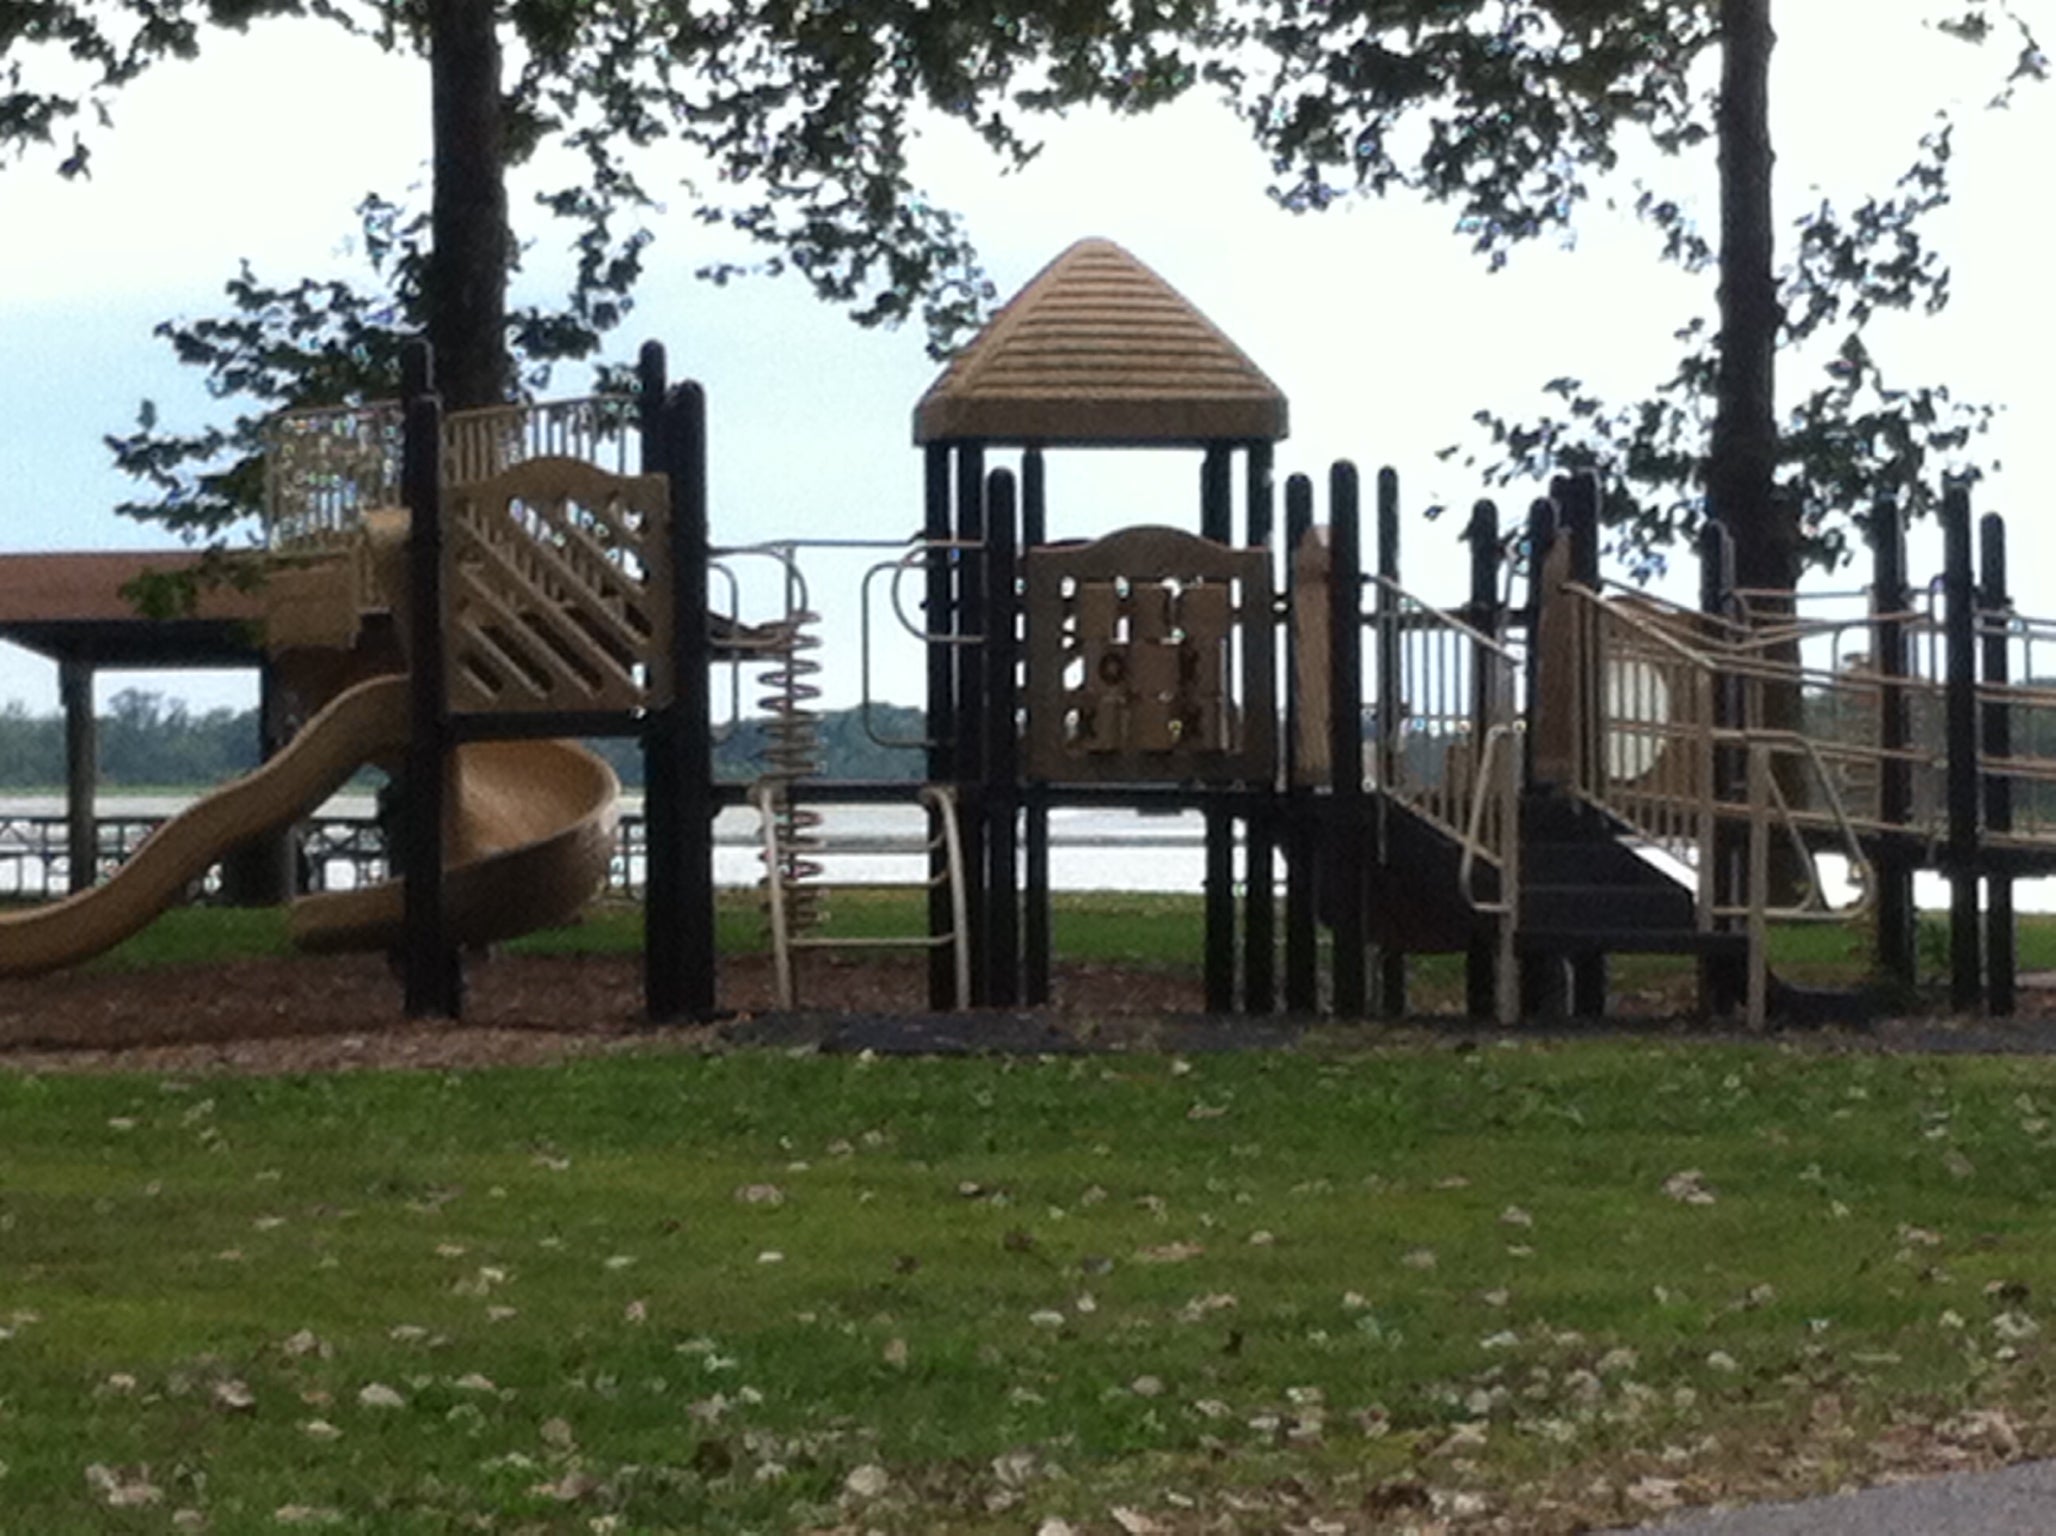 The park has some nice playgrounds for kiddos. 